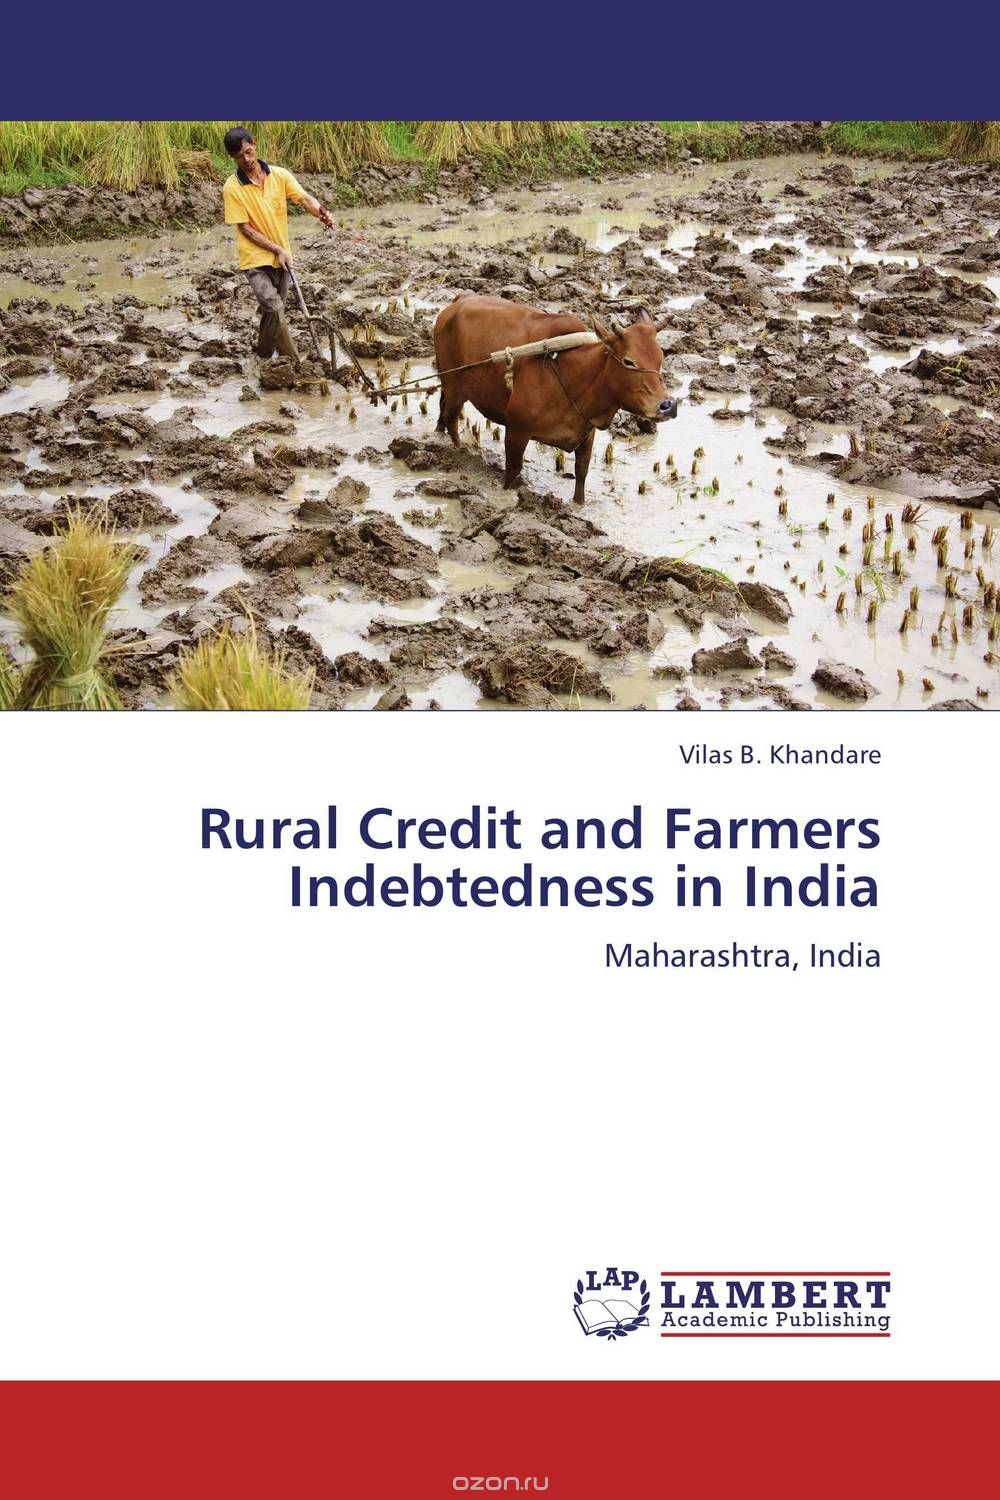 Rural Credit and Farmers Indebtedness in India